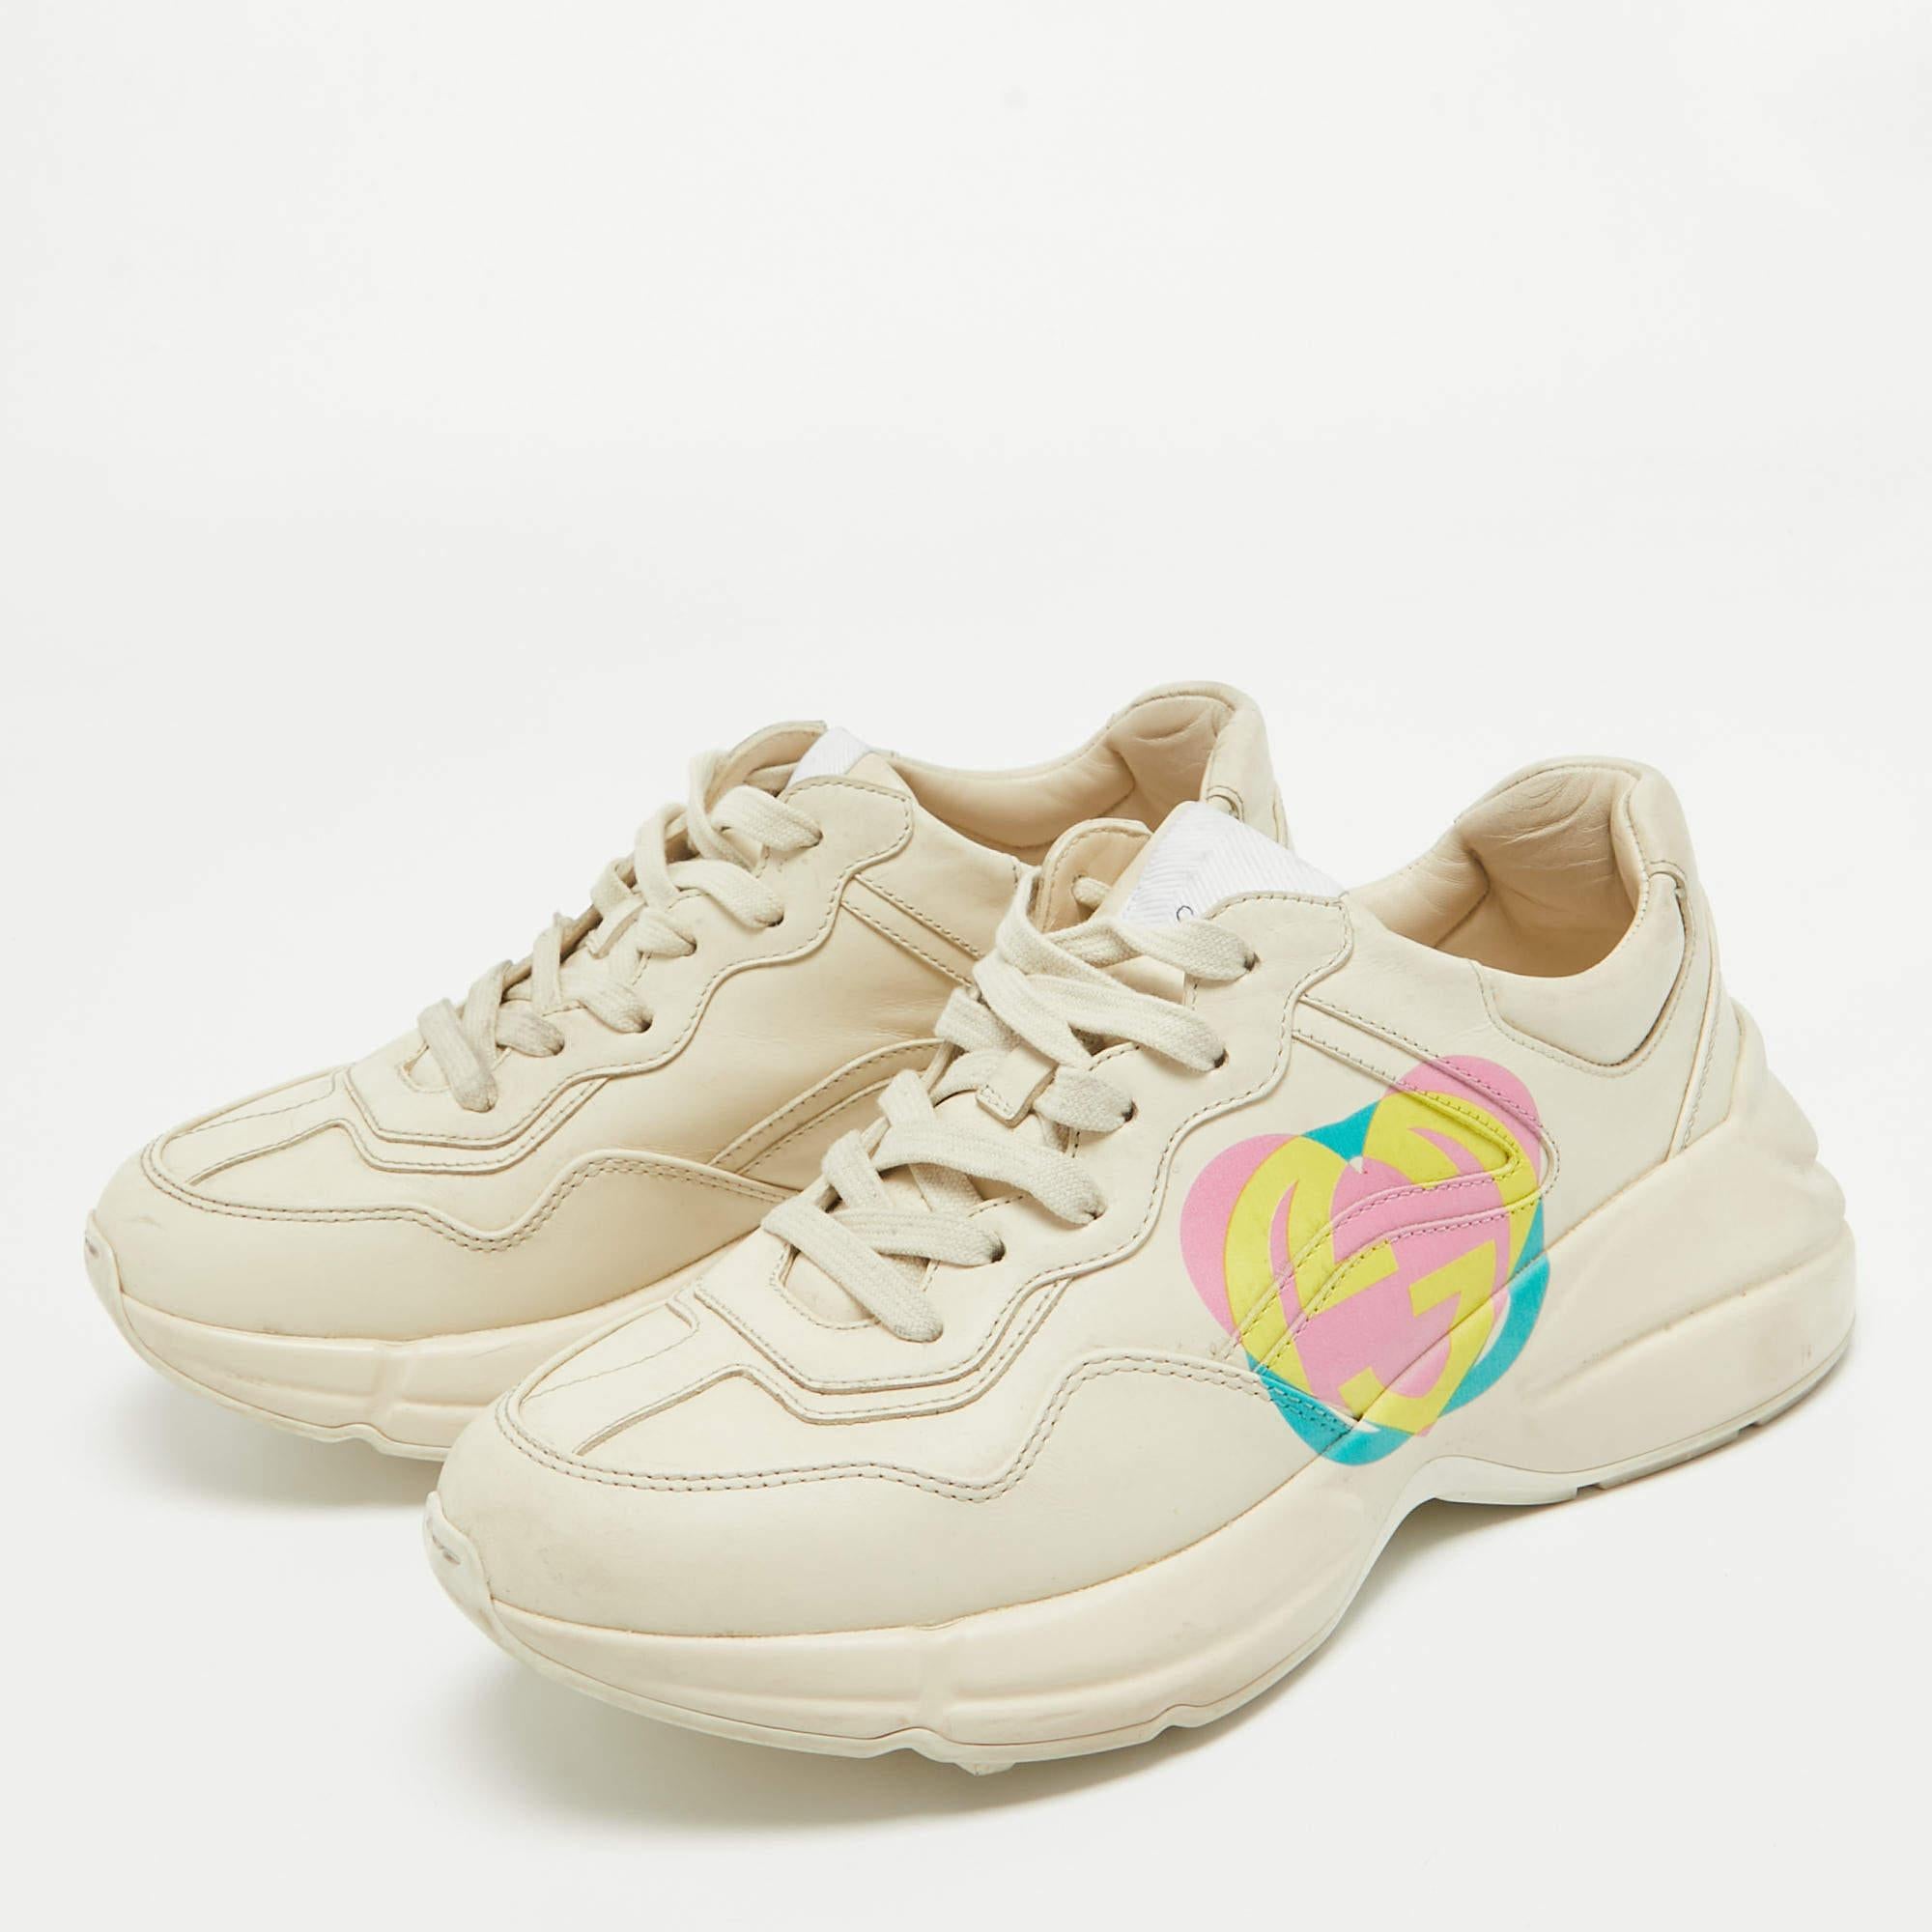 Gucci Cream Leather GG Heart Rhyton Sneakers Size 38 For Sale 4